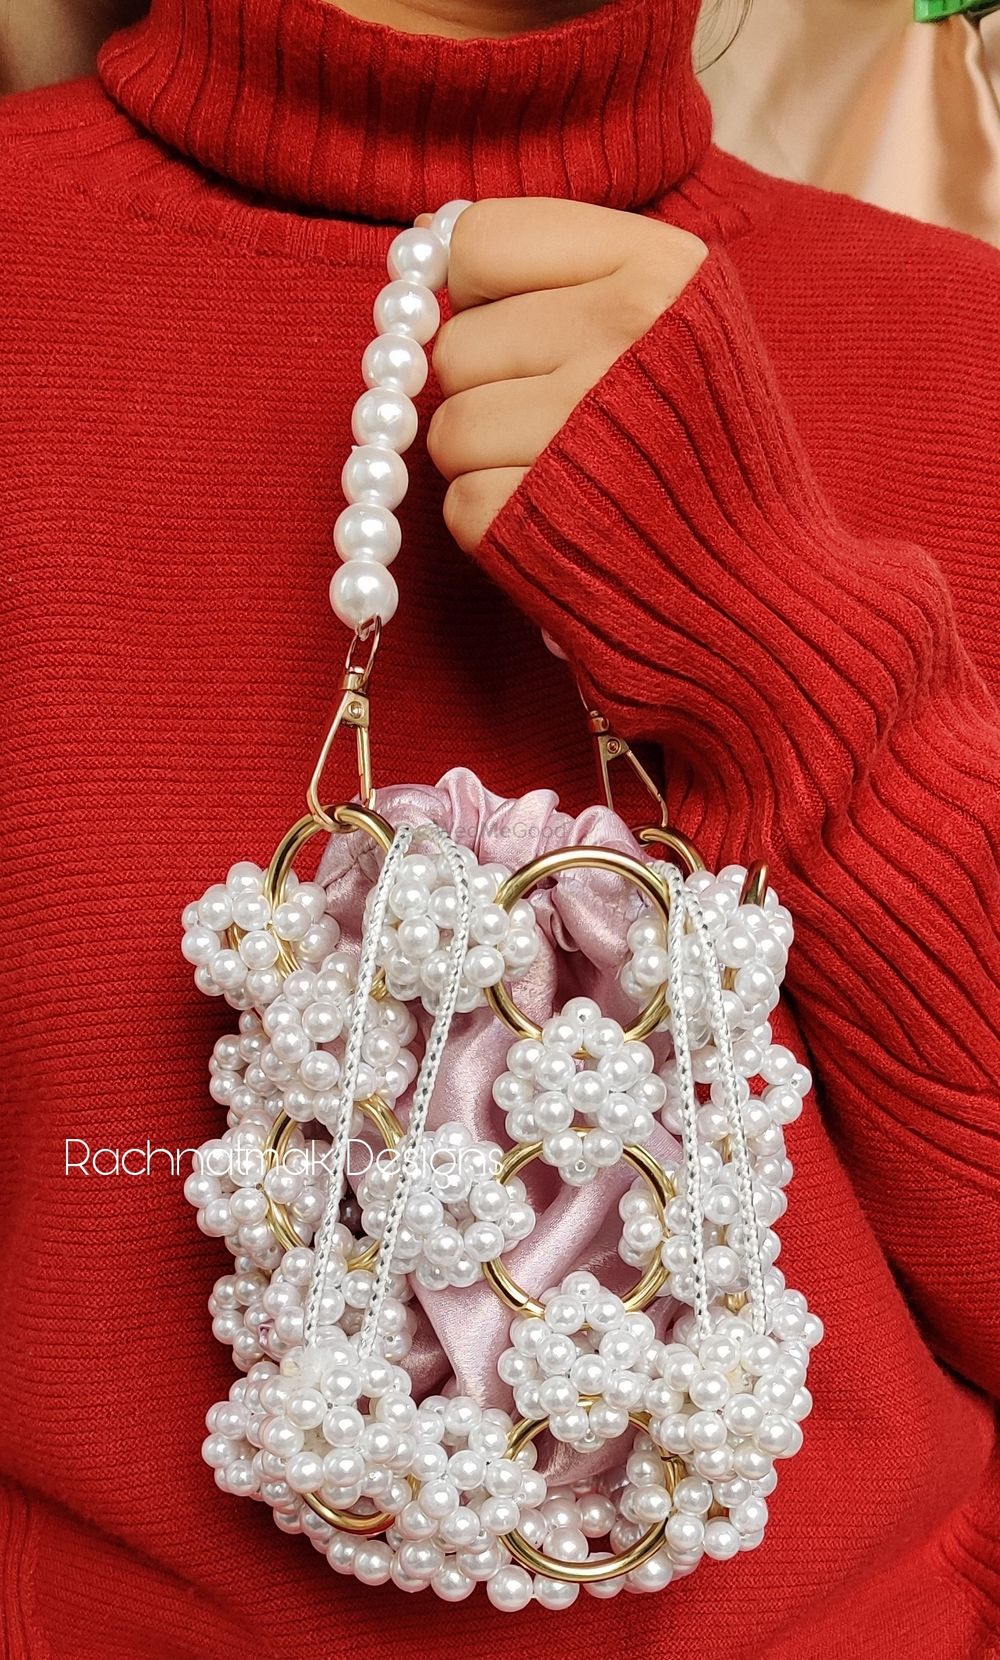 Photo From Beaded Bags Collection - By Rachnatmak Designs